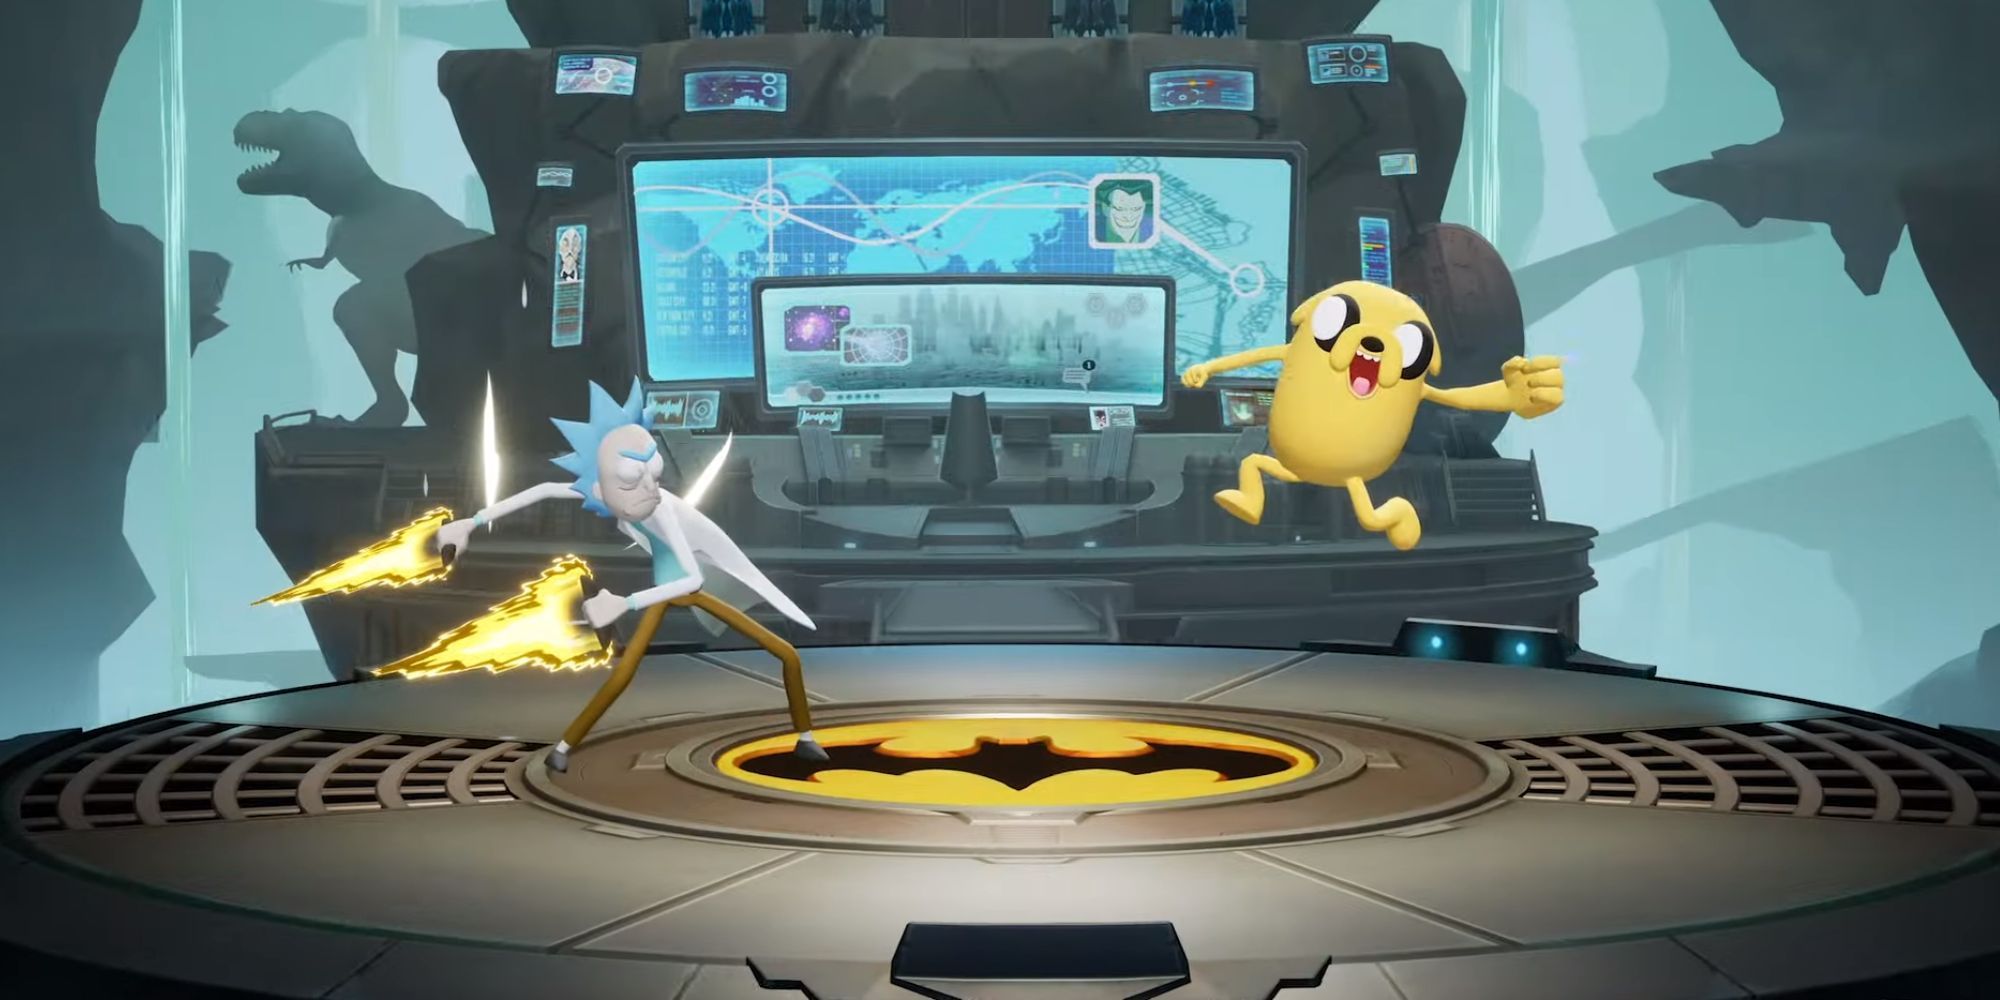 Rick from Rick & Morty fighting Jake from Adventure Time in MultiVersus